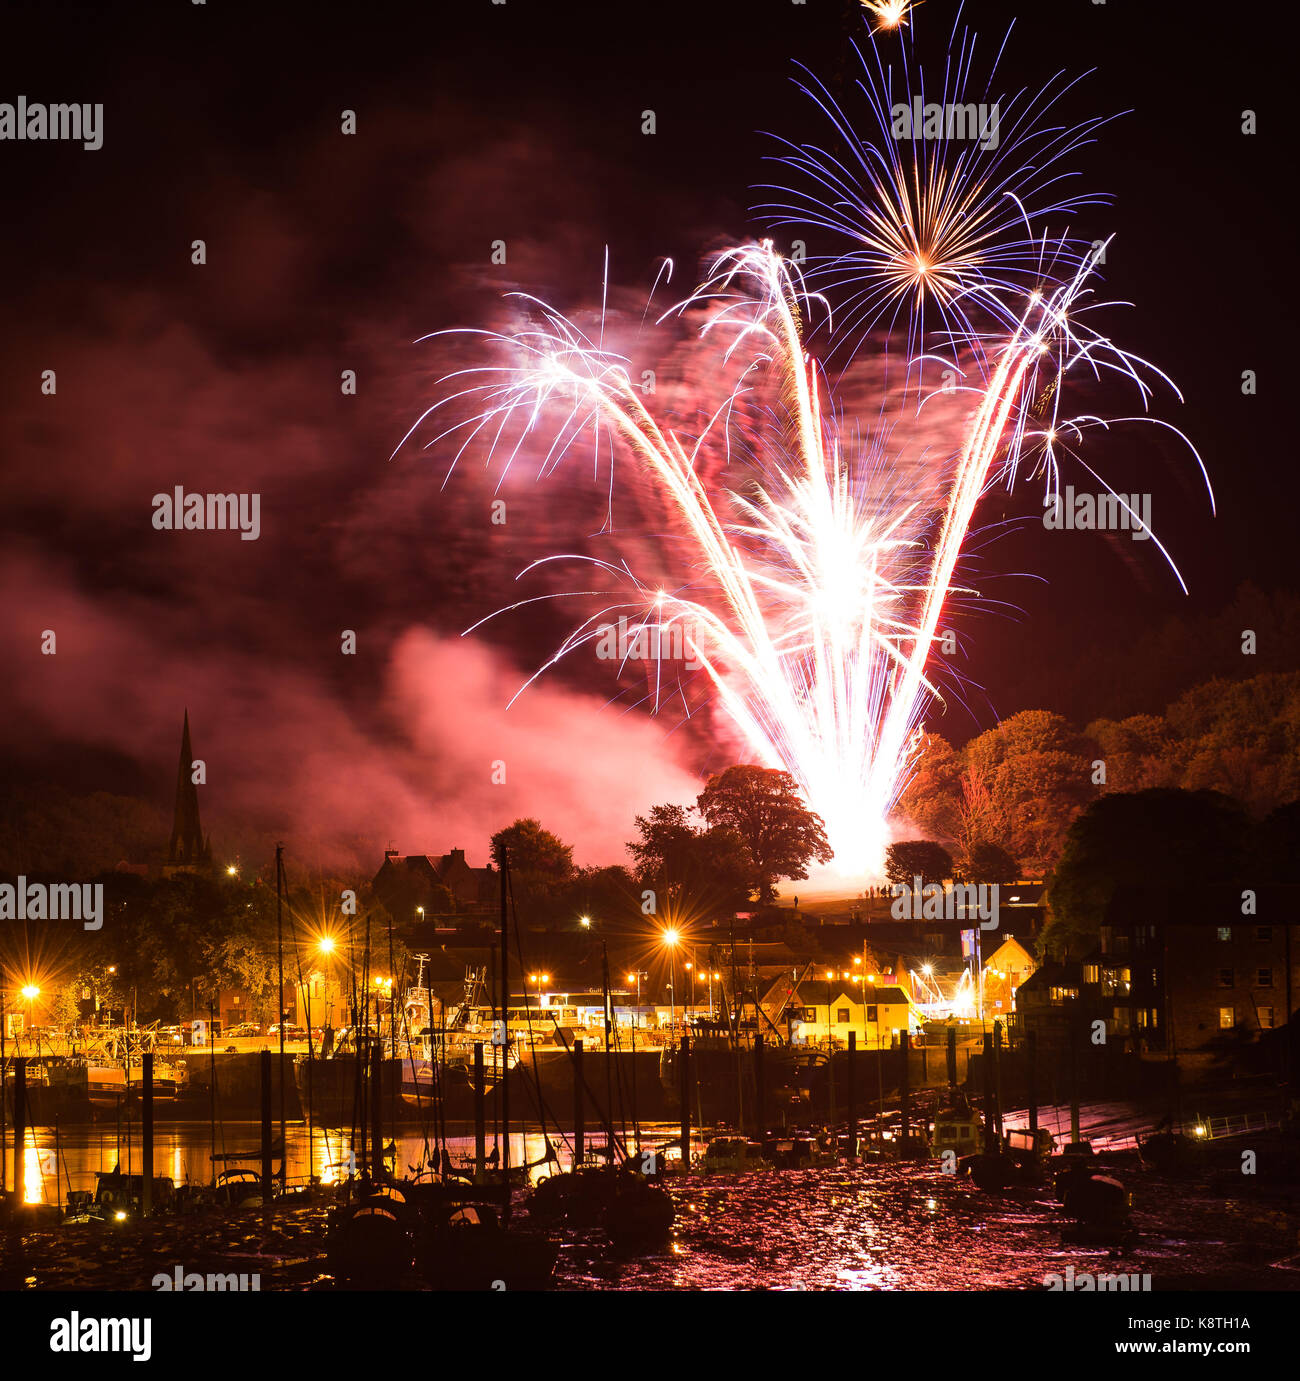 Kirkcudbright, Tattoo, Fireworks, Display, 2017,Boats, Harbour, Star bursts, mudflats, Church, red colour, Harbour Lights, Galloway, Scotland Stock Photo